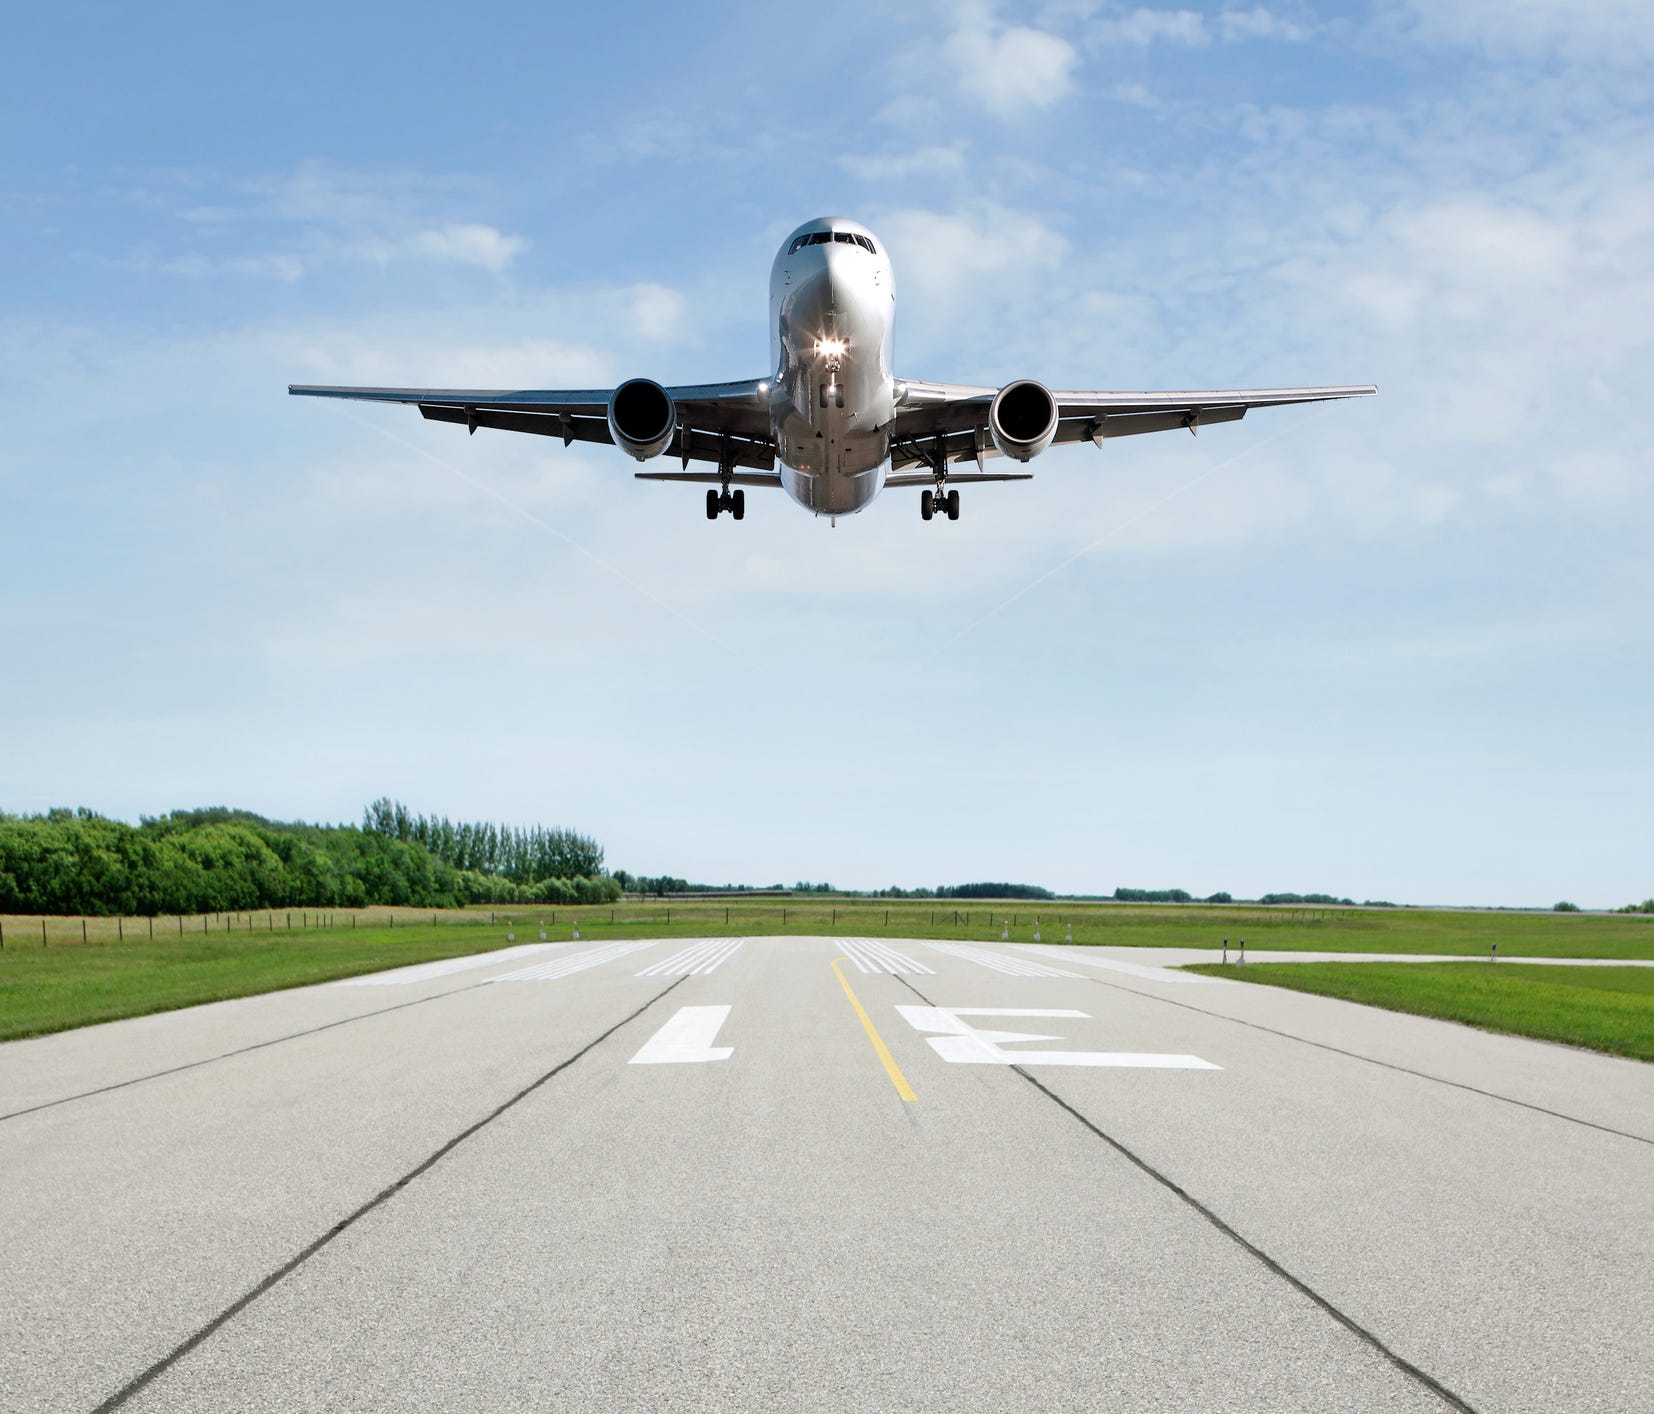 Airlines. manufacturers and regulators have made major strides in improving aviation safety.